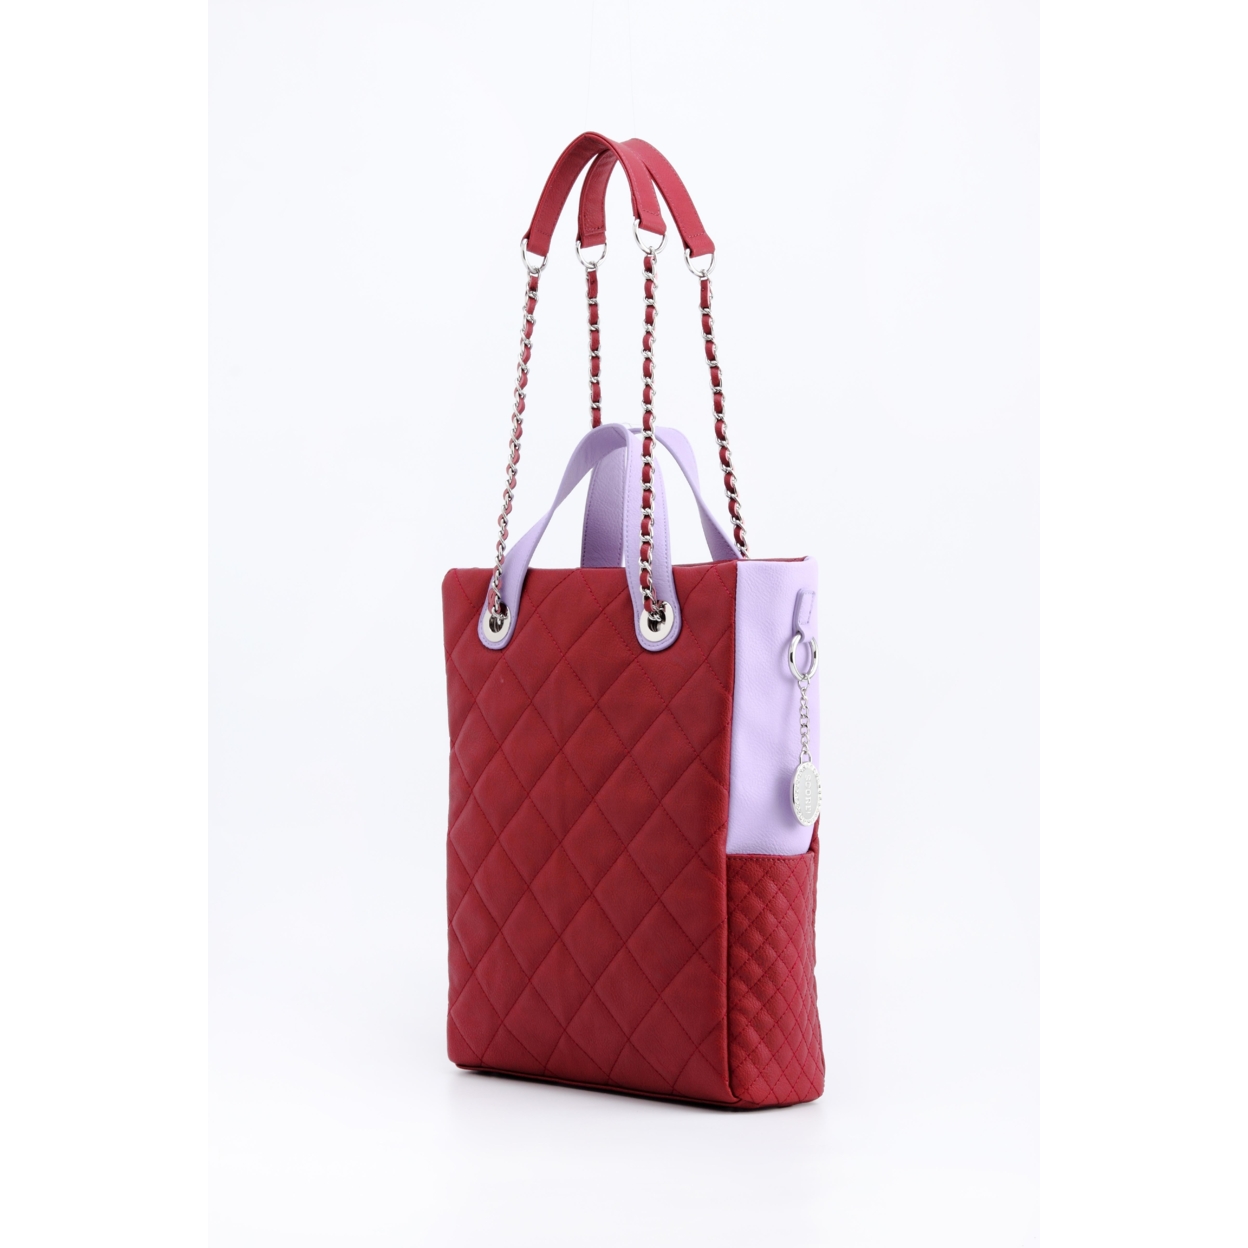 SCORE!'s Kat Travel Tote For Business, Work, Or School Quilted Shoulder Bag - Maroon And Lavender